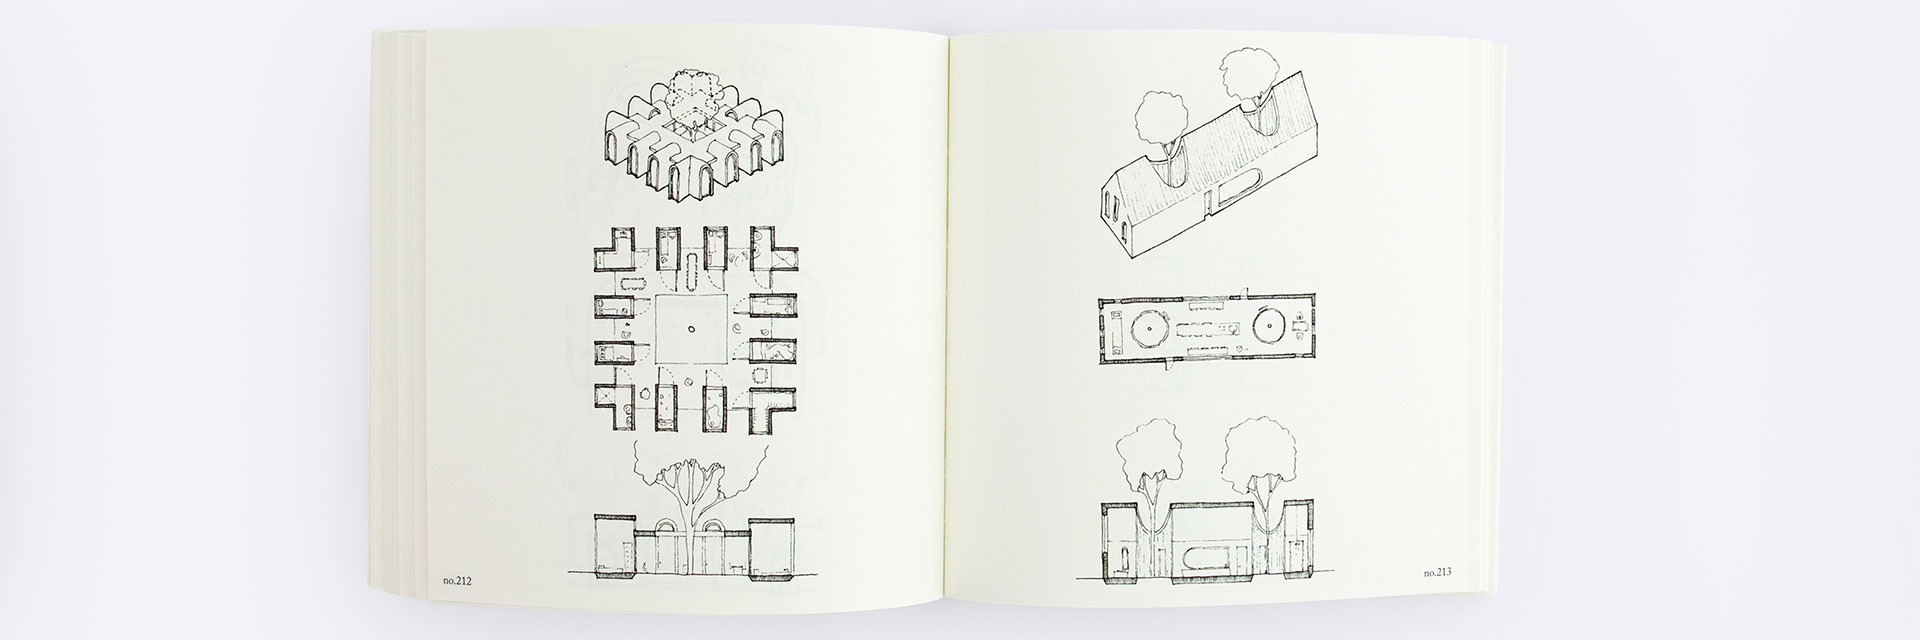 Andy Bruno's book opened to two hand-drawn house plans.